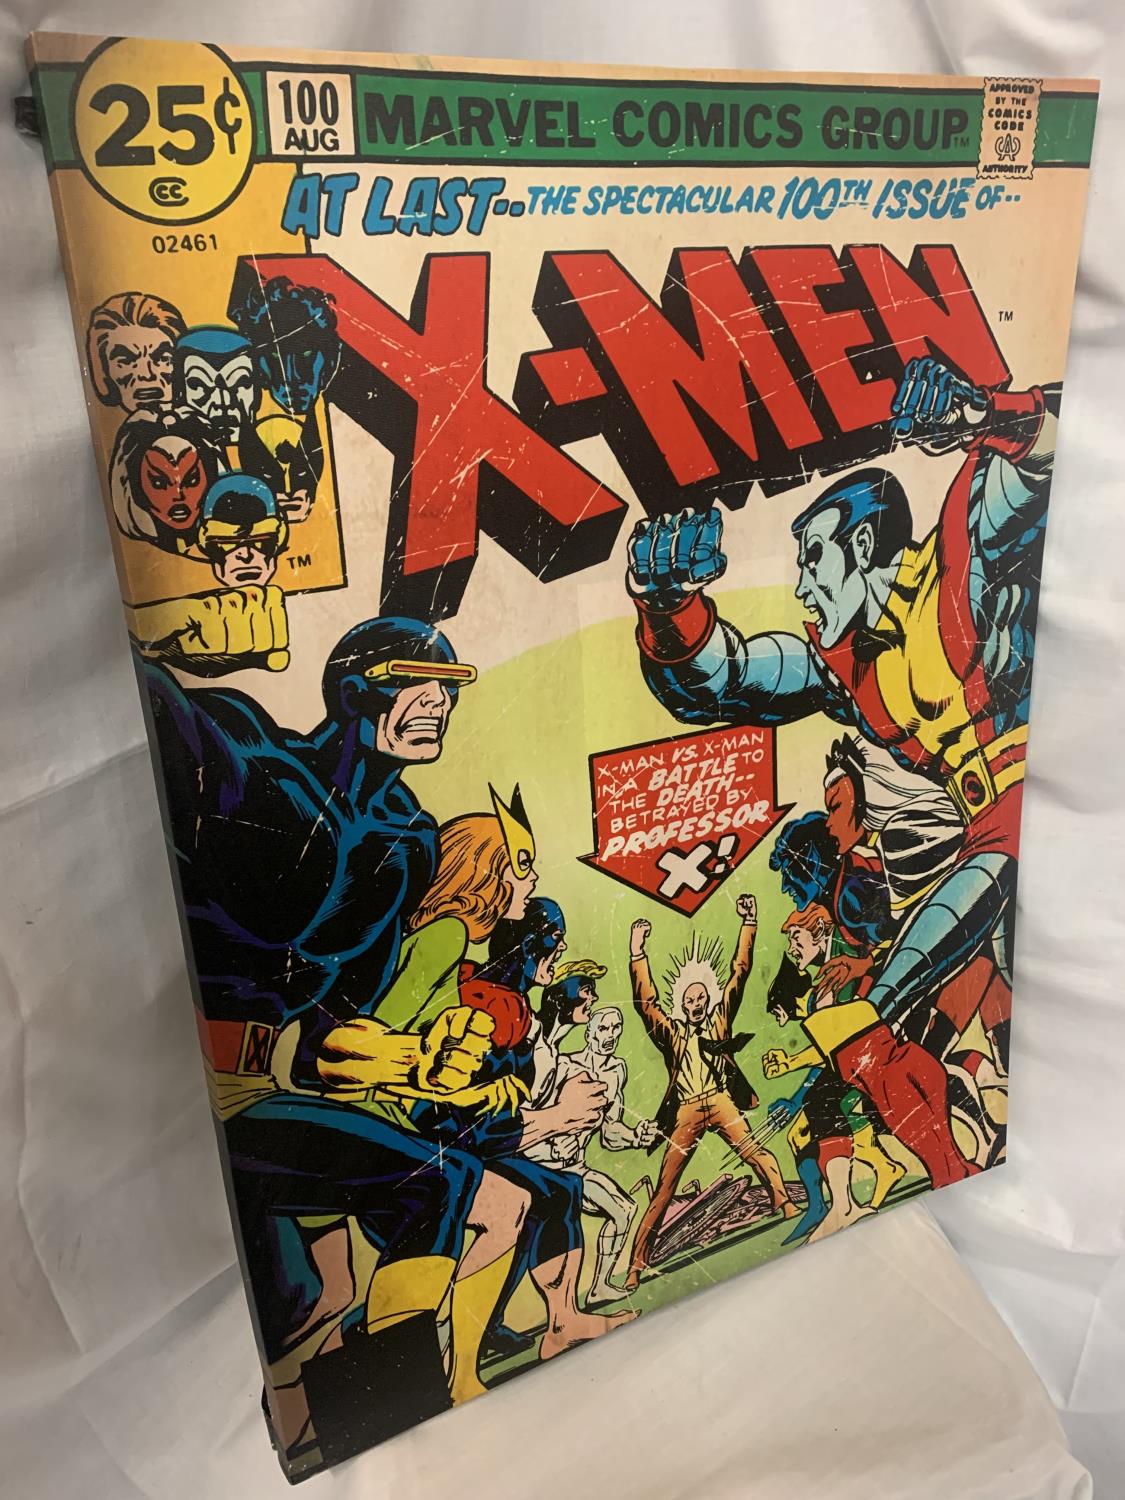 A LARGE XMEN COMIC STYLE CANVAS - Image 3 of 6